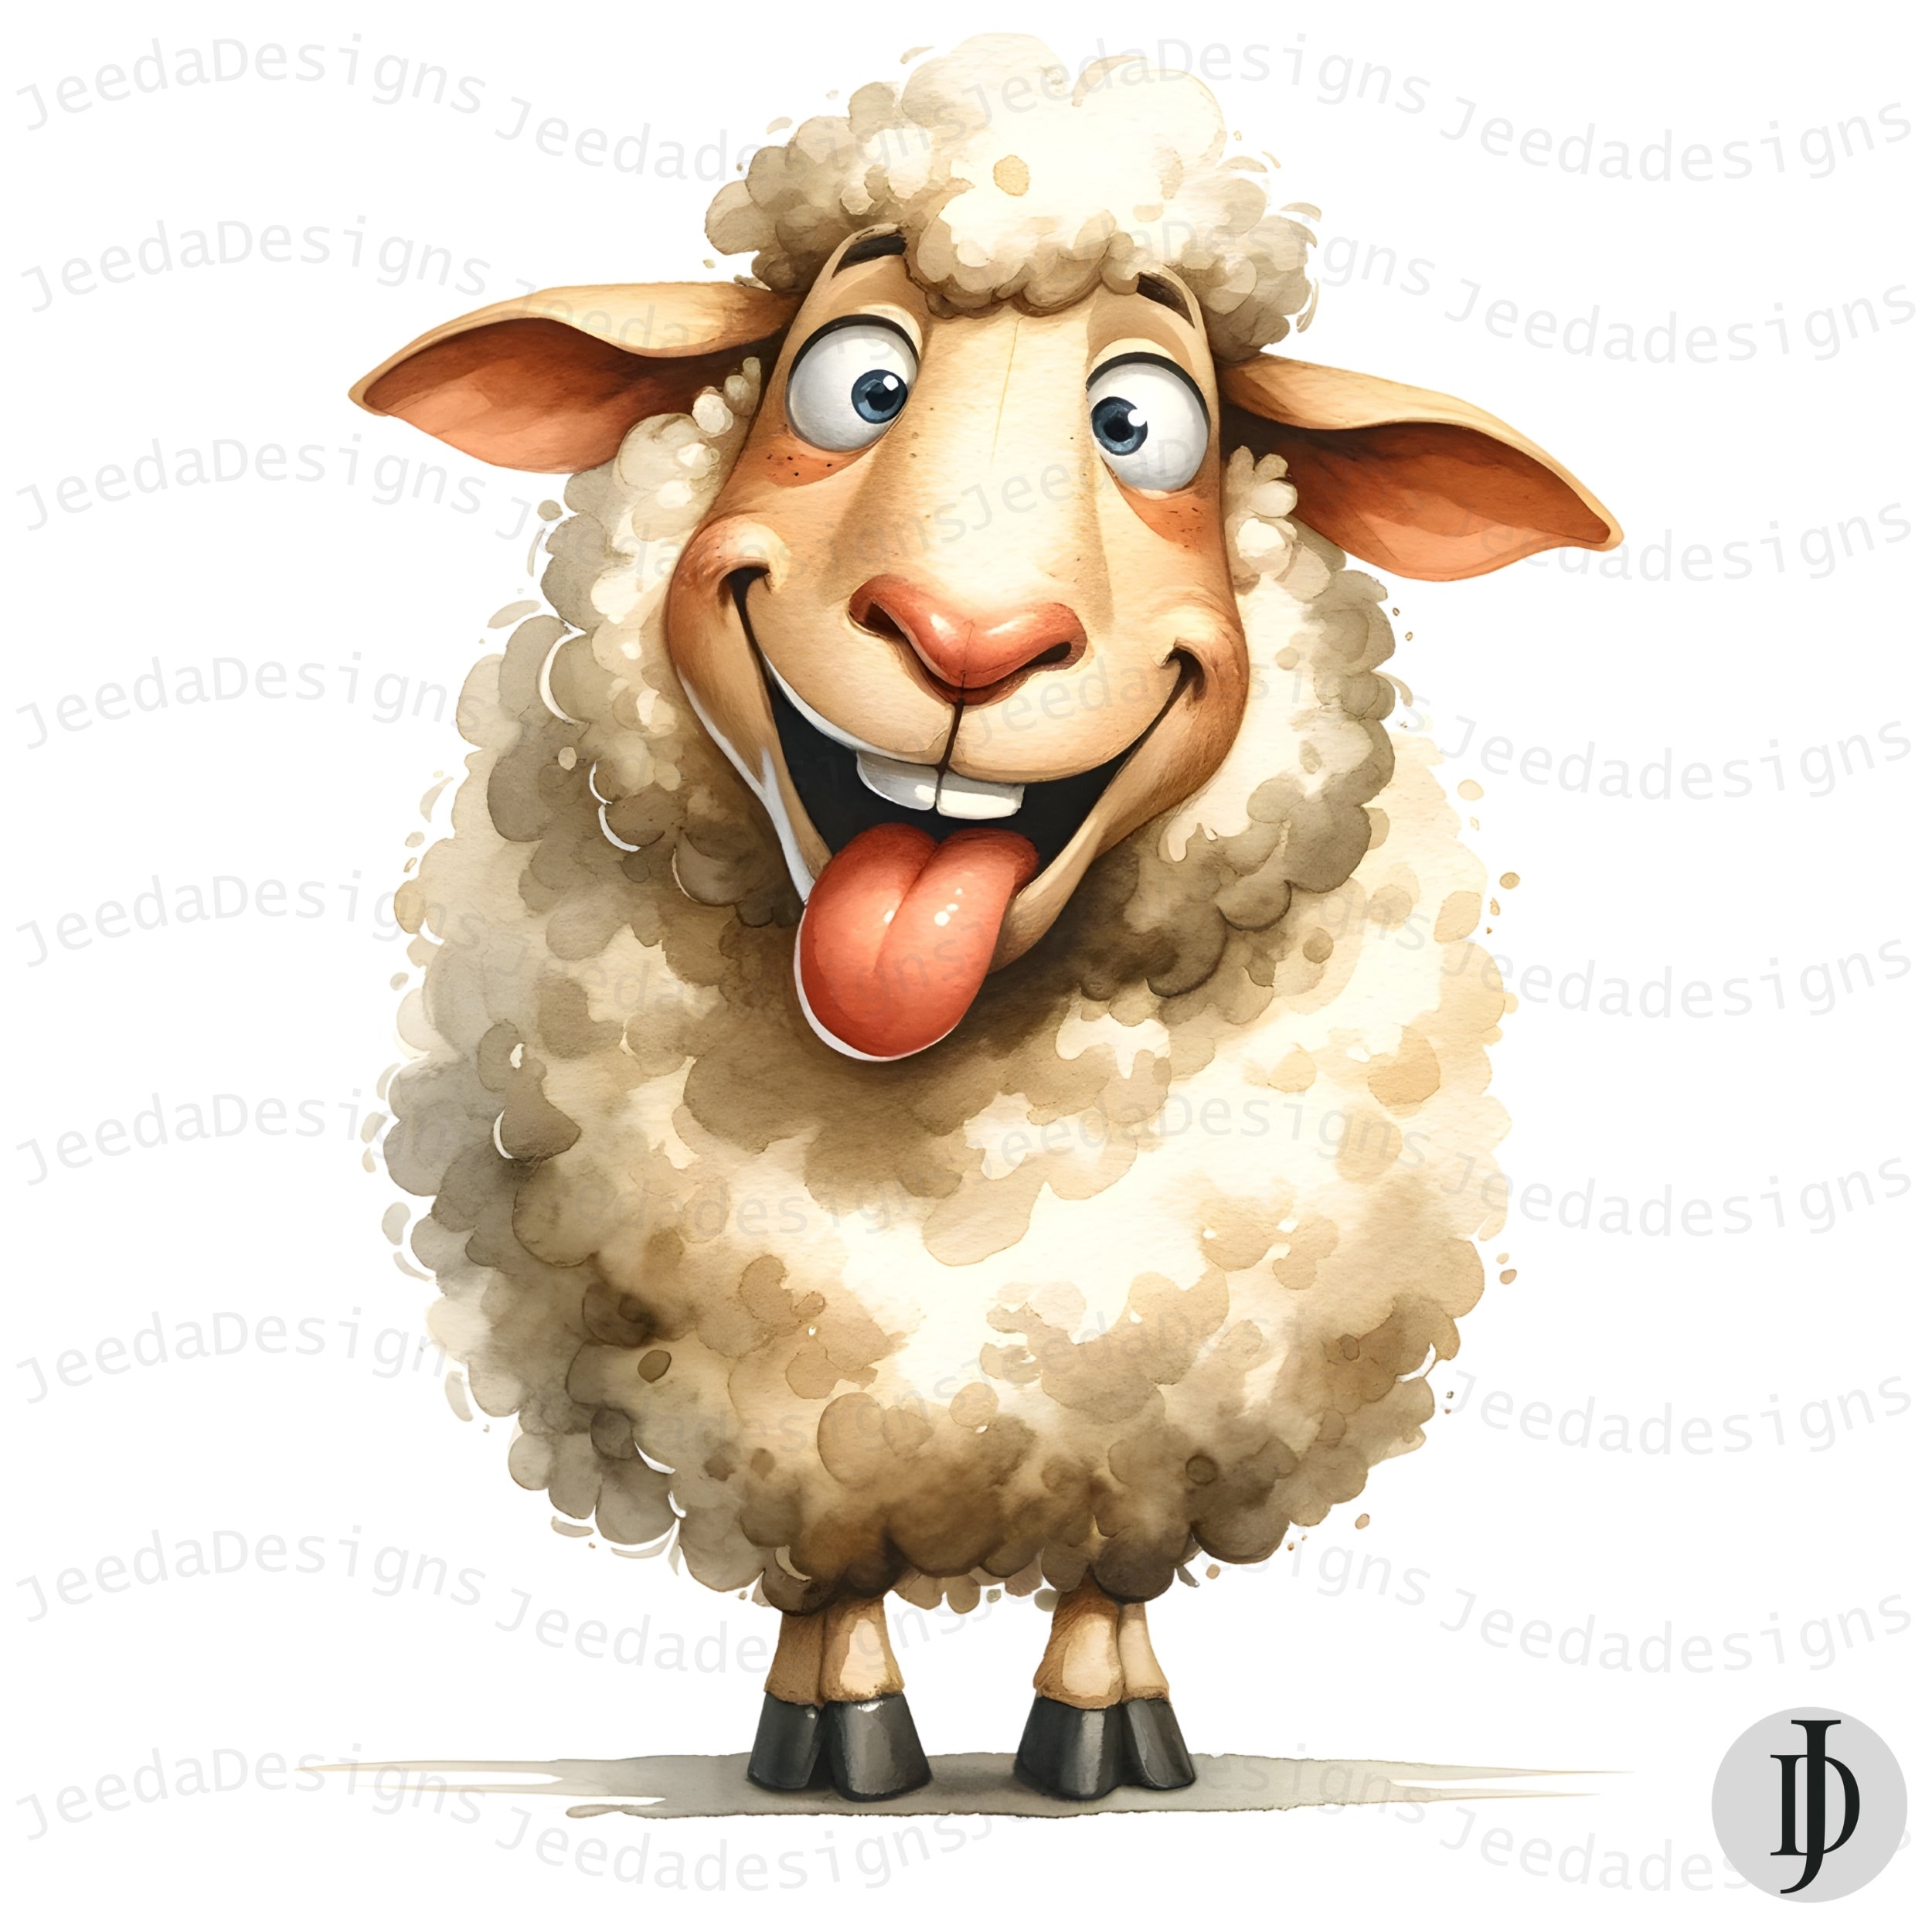 Funny Sheep Cartoon Animal Clipart PNG, Watercolor Clipart, Funny ...